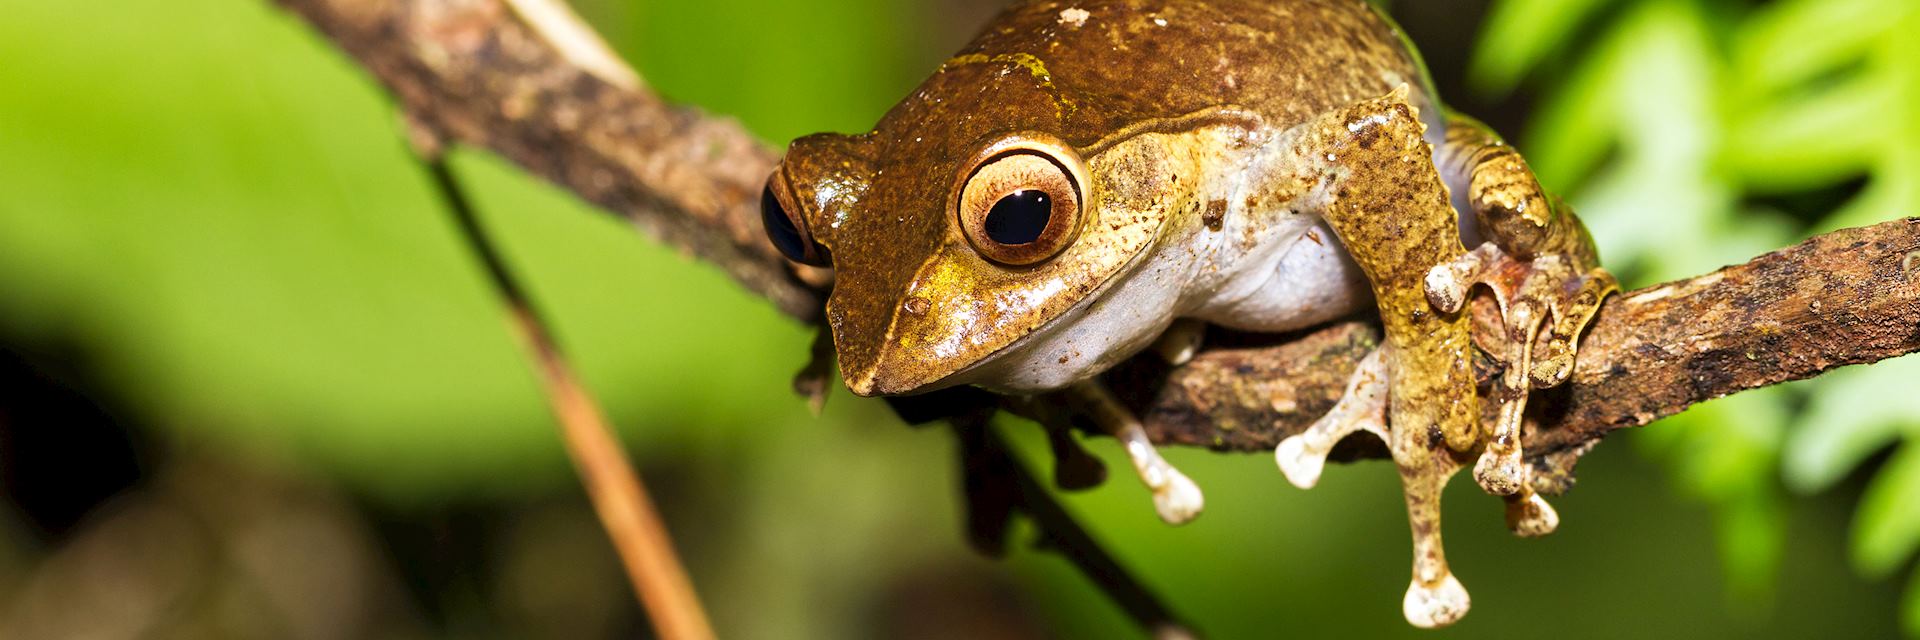 One of the many species of tree frog in Madagascar